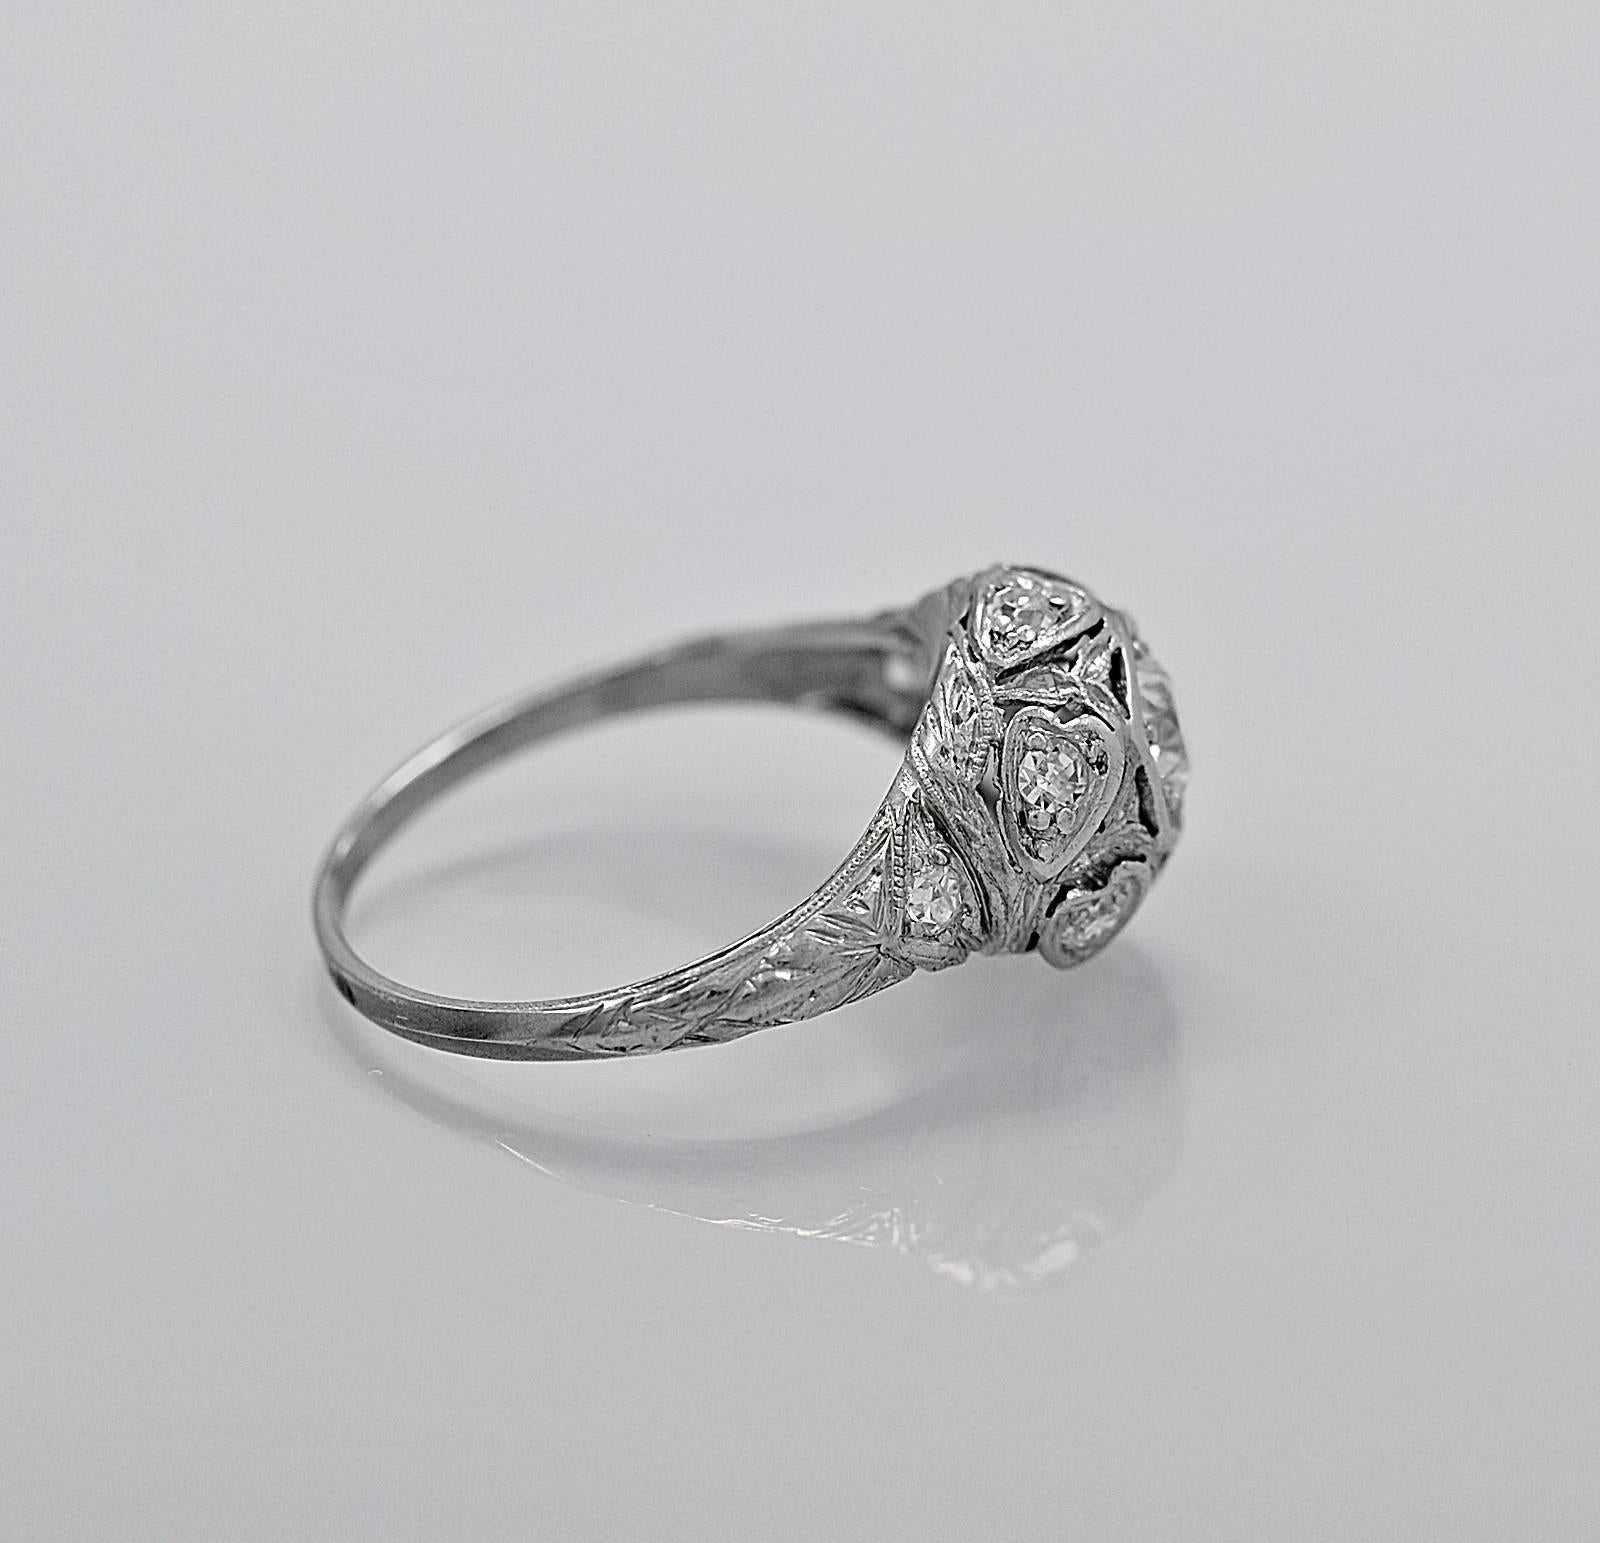 A decorative antique engagement ring featuring a .33ct. apx. European cut diamond with VS1 clarity and K color. The uniquely designed mounting has .16ct. apx. T.W. of accenting diamonds that are surrounded with heart shaped bezels. The shank is